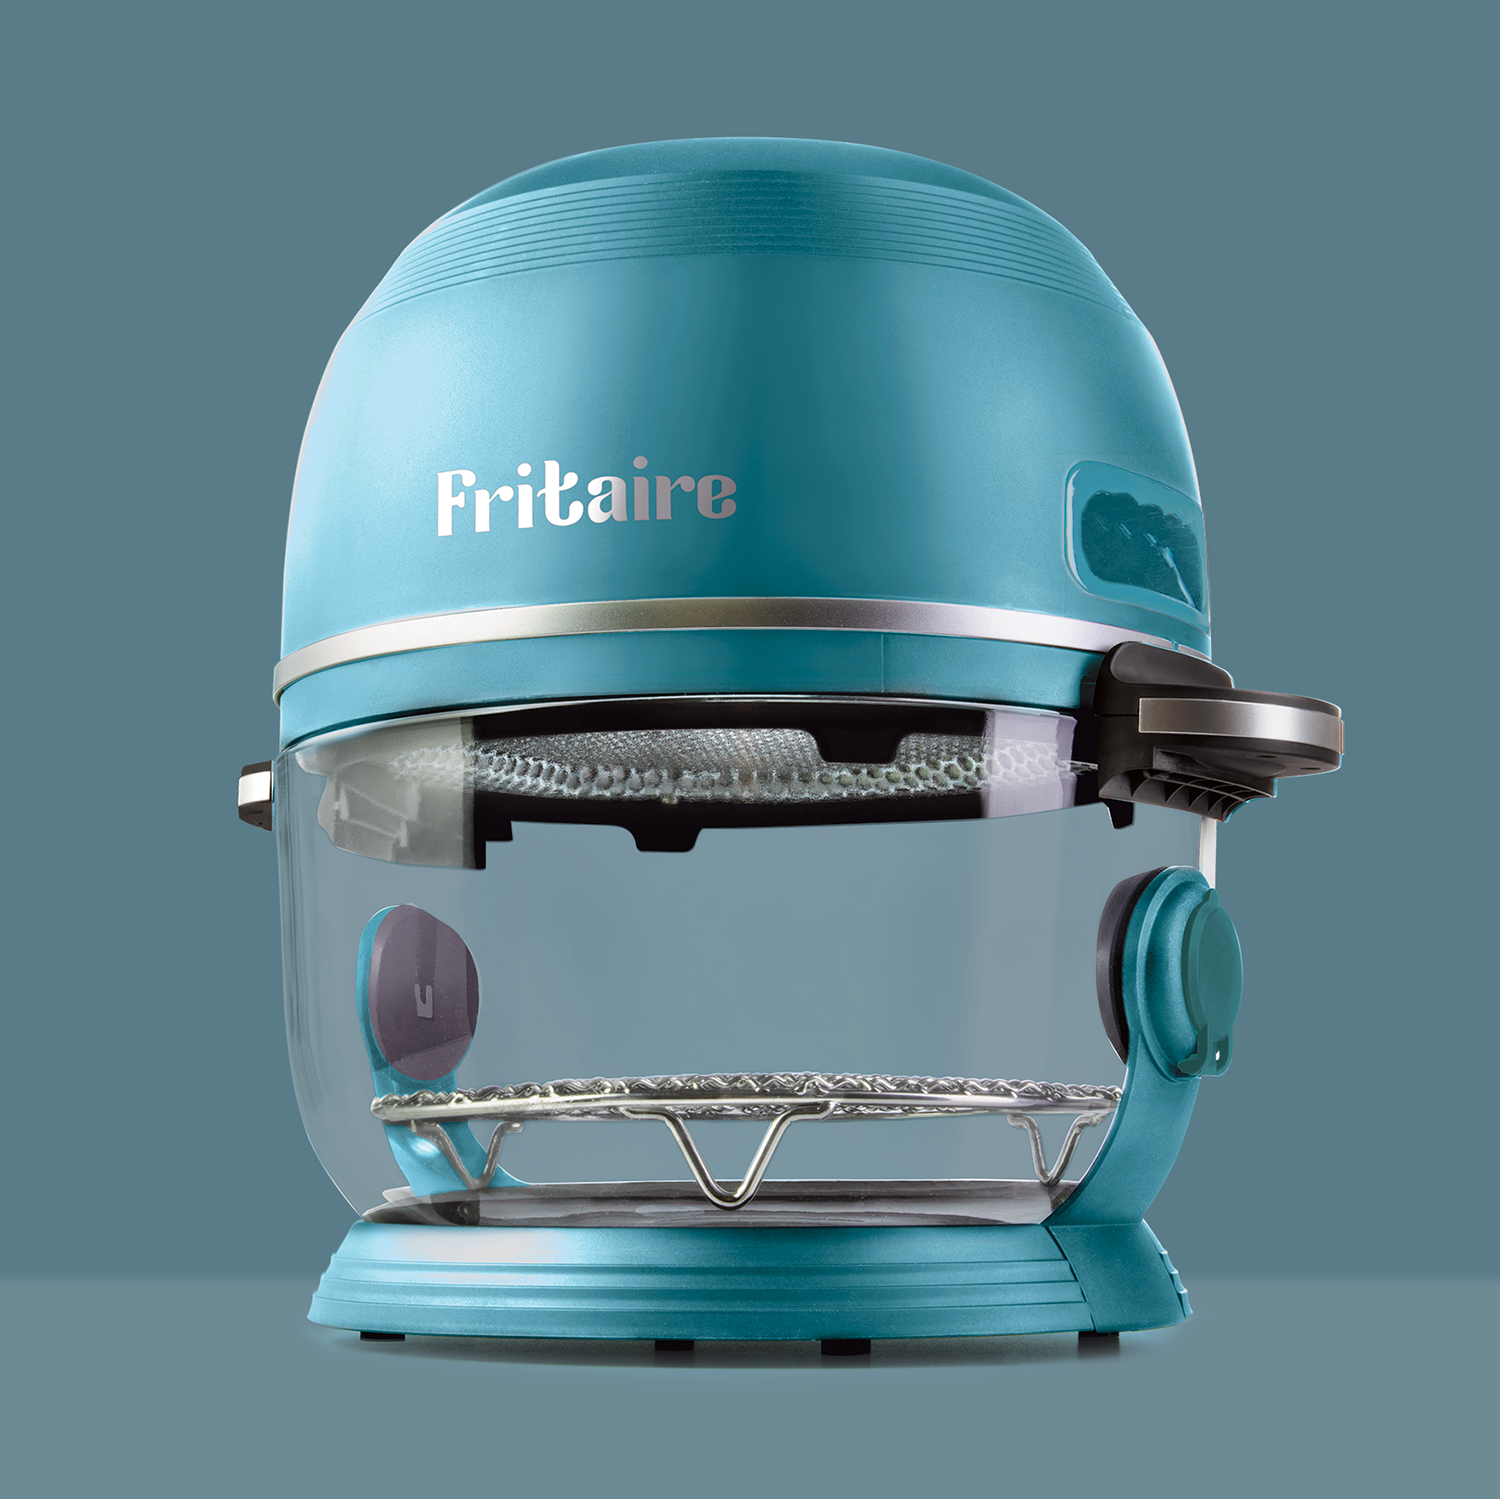 ALL NEW GLASS, SELF CLEANING AIR FRYER By Fritaire